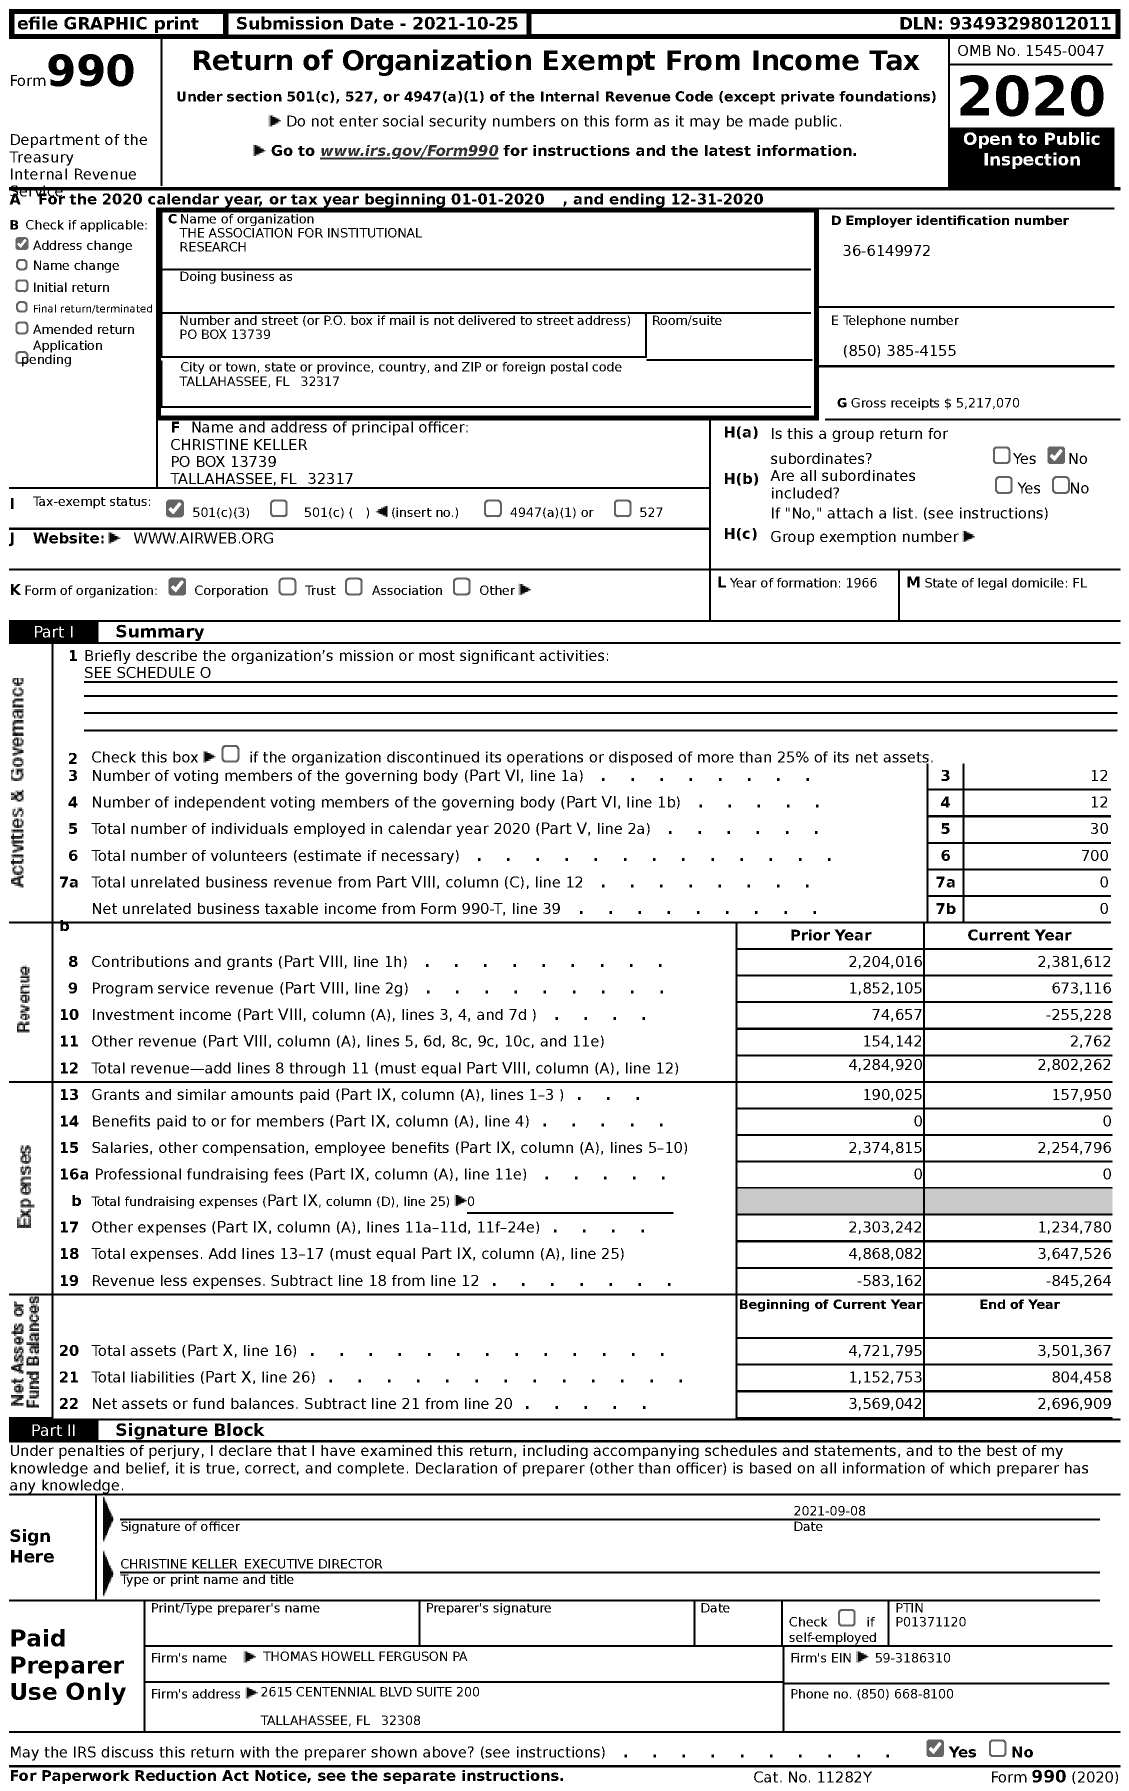 Image of first page of 2020 Form 990 for The Association for Institutional Research